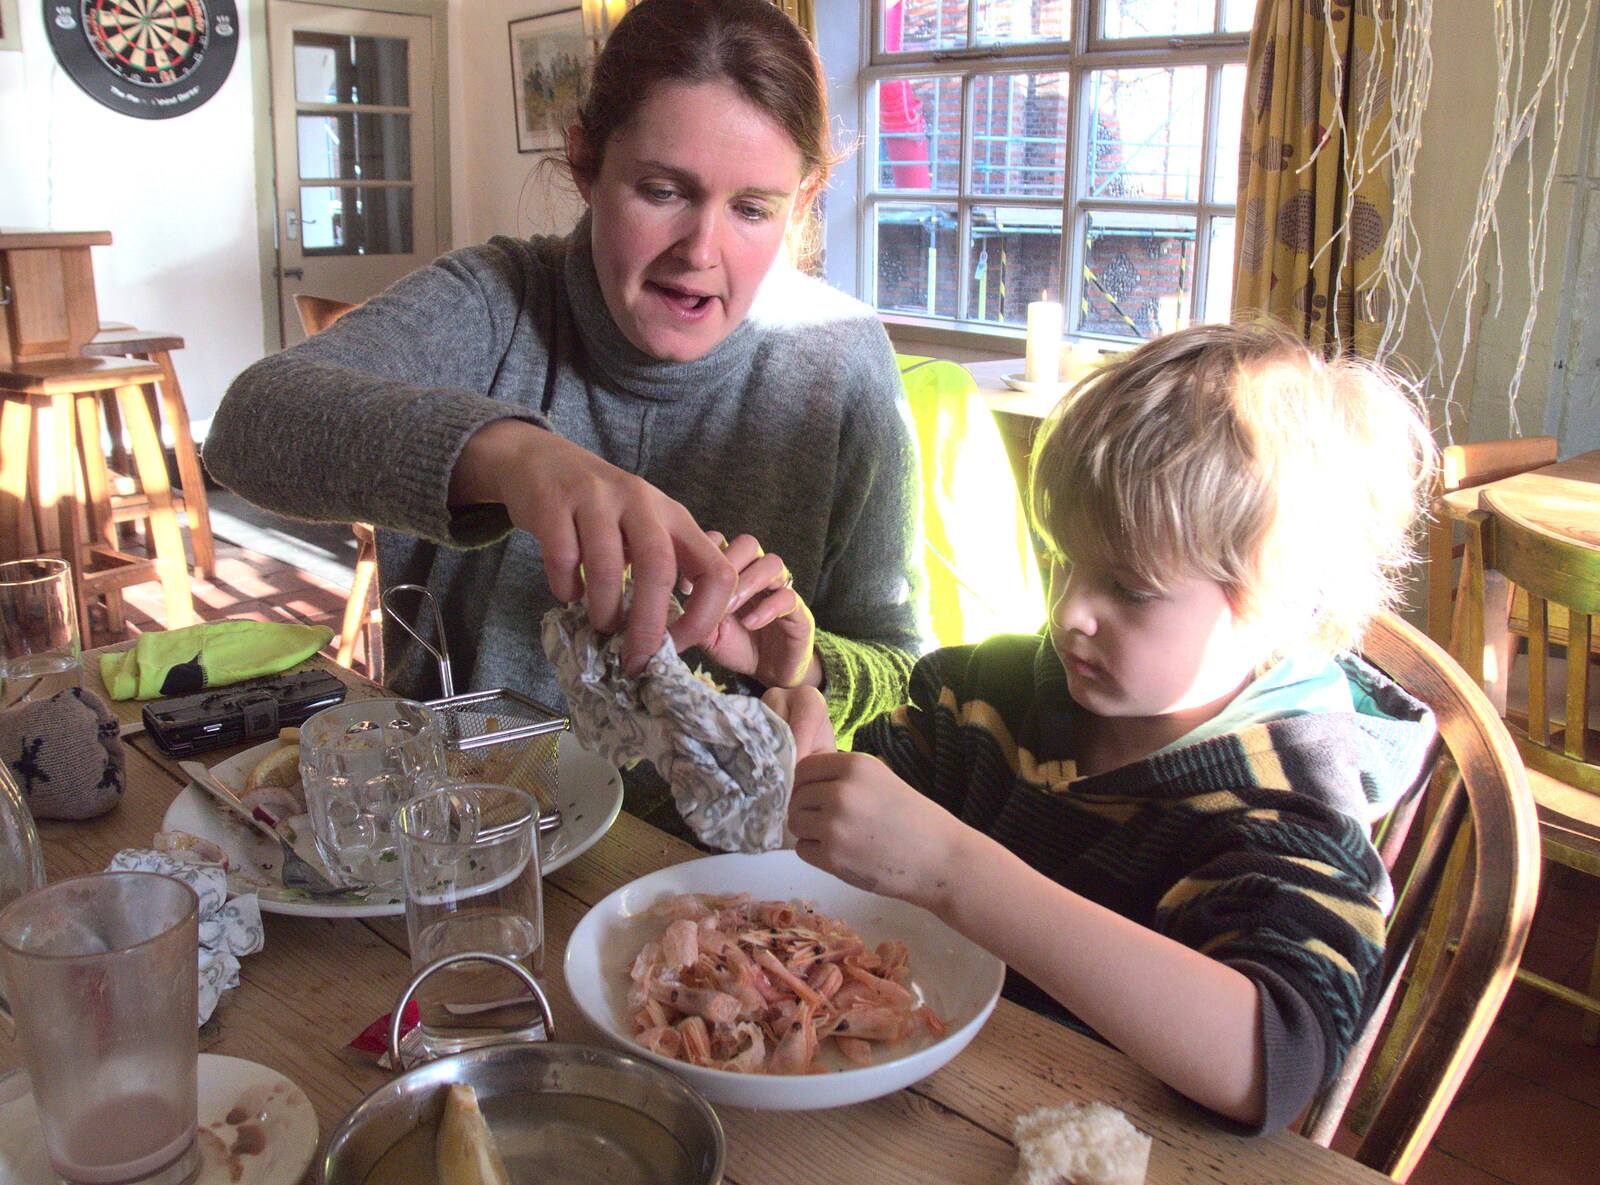 Isobel helps harry with prawn shells from Boxing Day in the Queen's Head, Eye, Suffolk - 26th December 2017